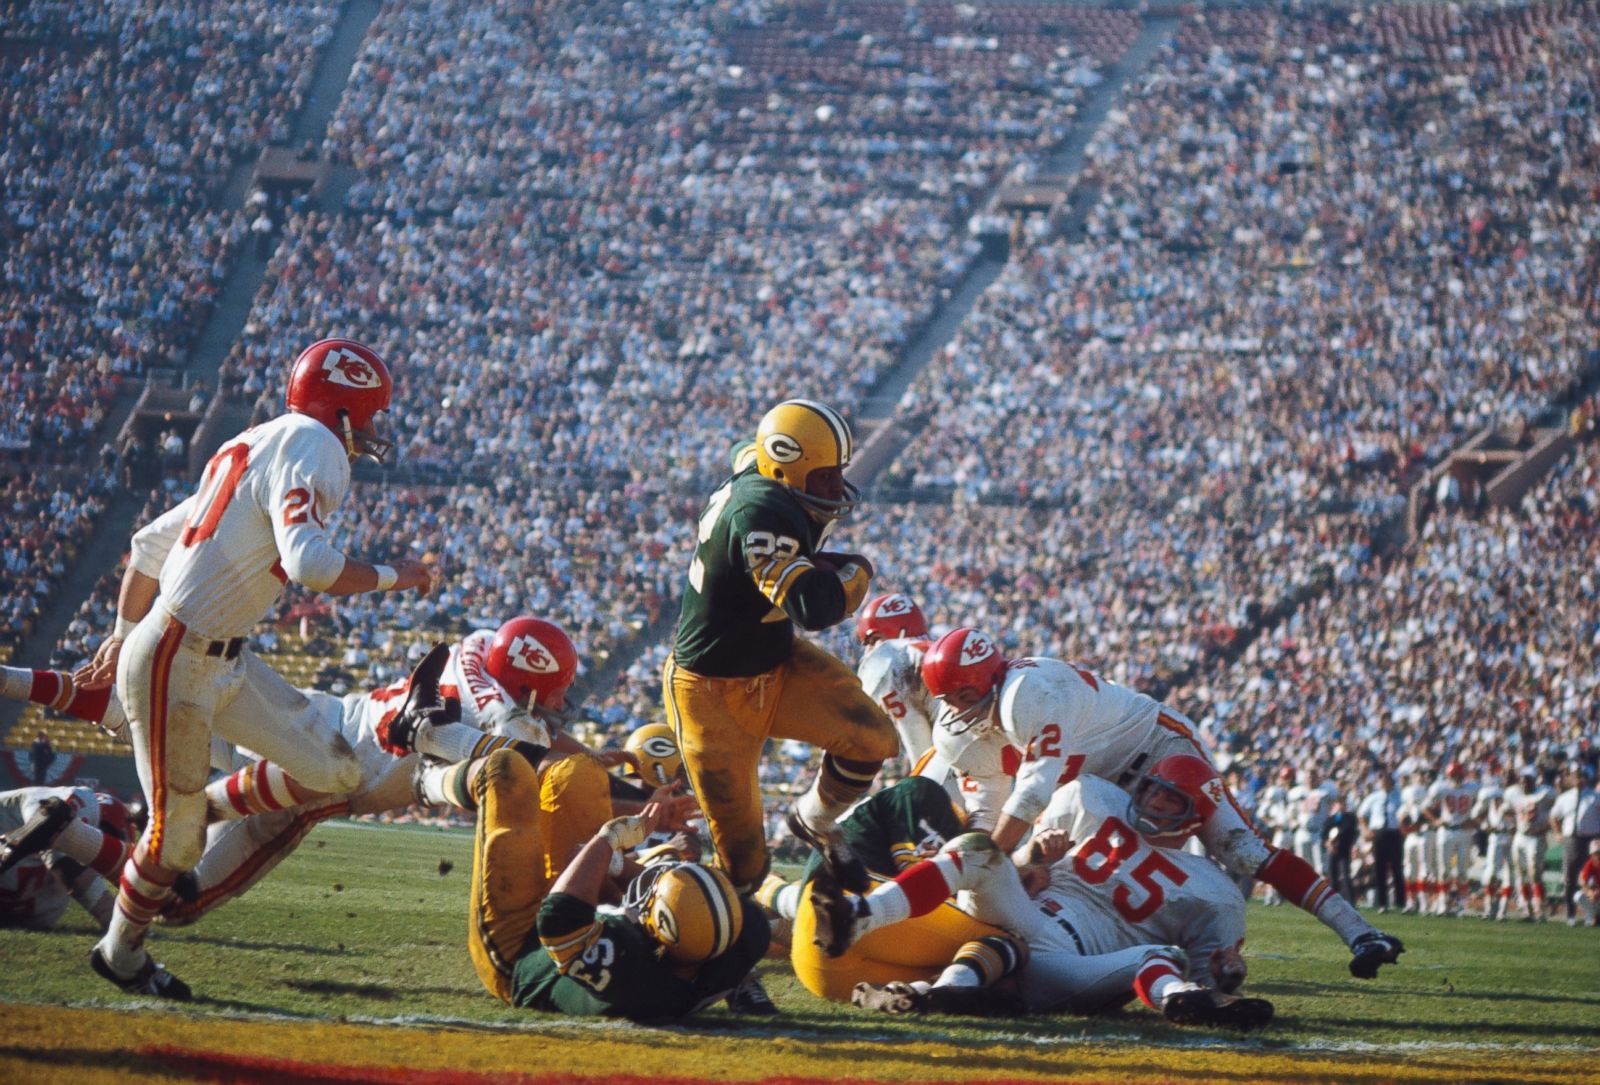 Photos from the first Super Bowl Photos | Image #31 - ABC News